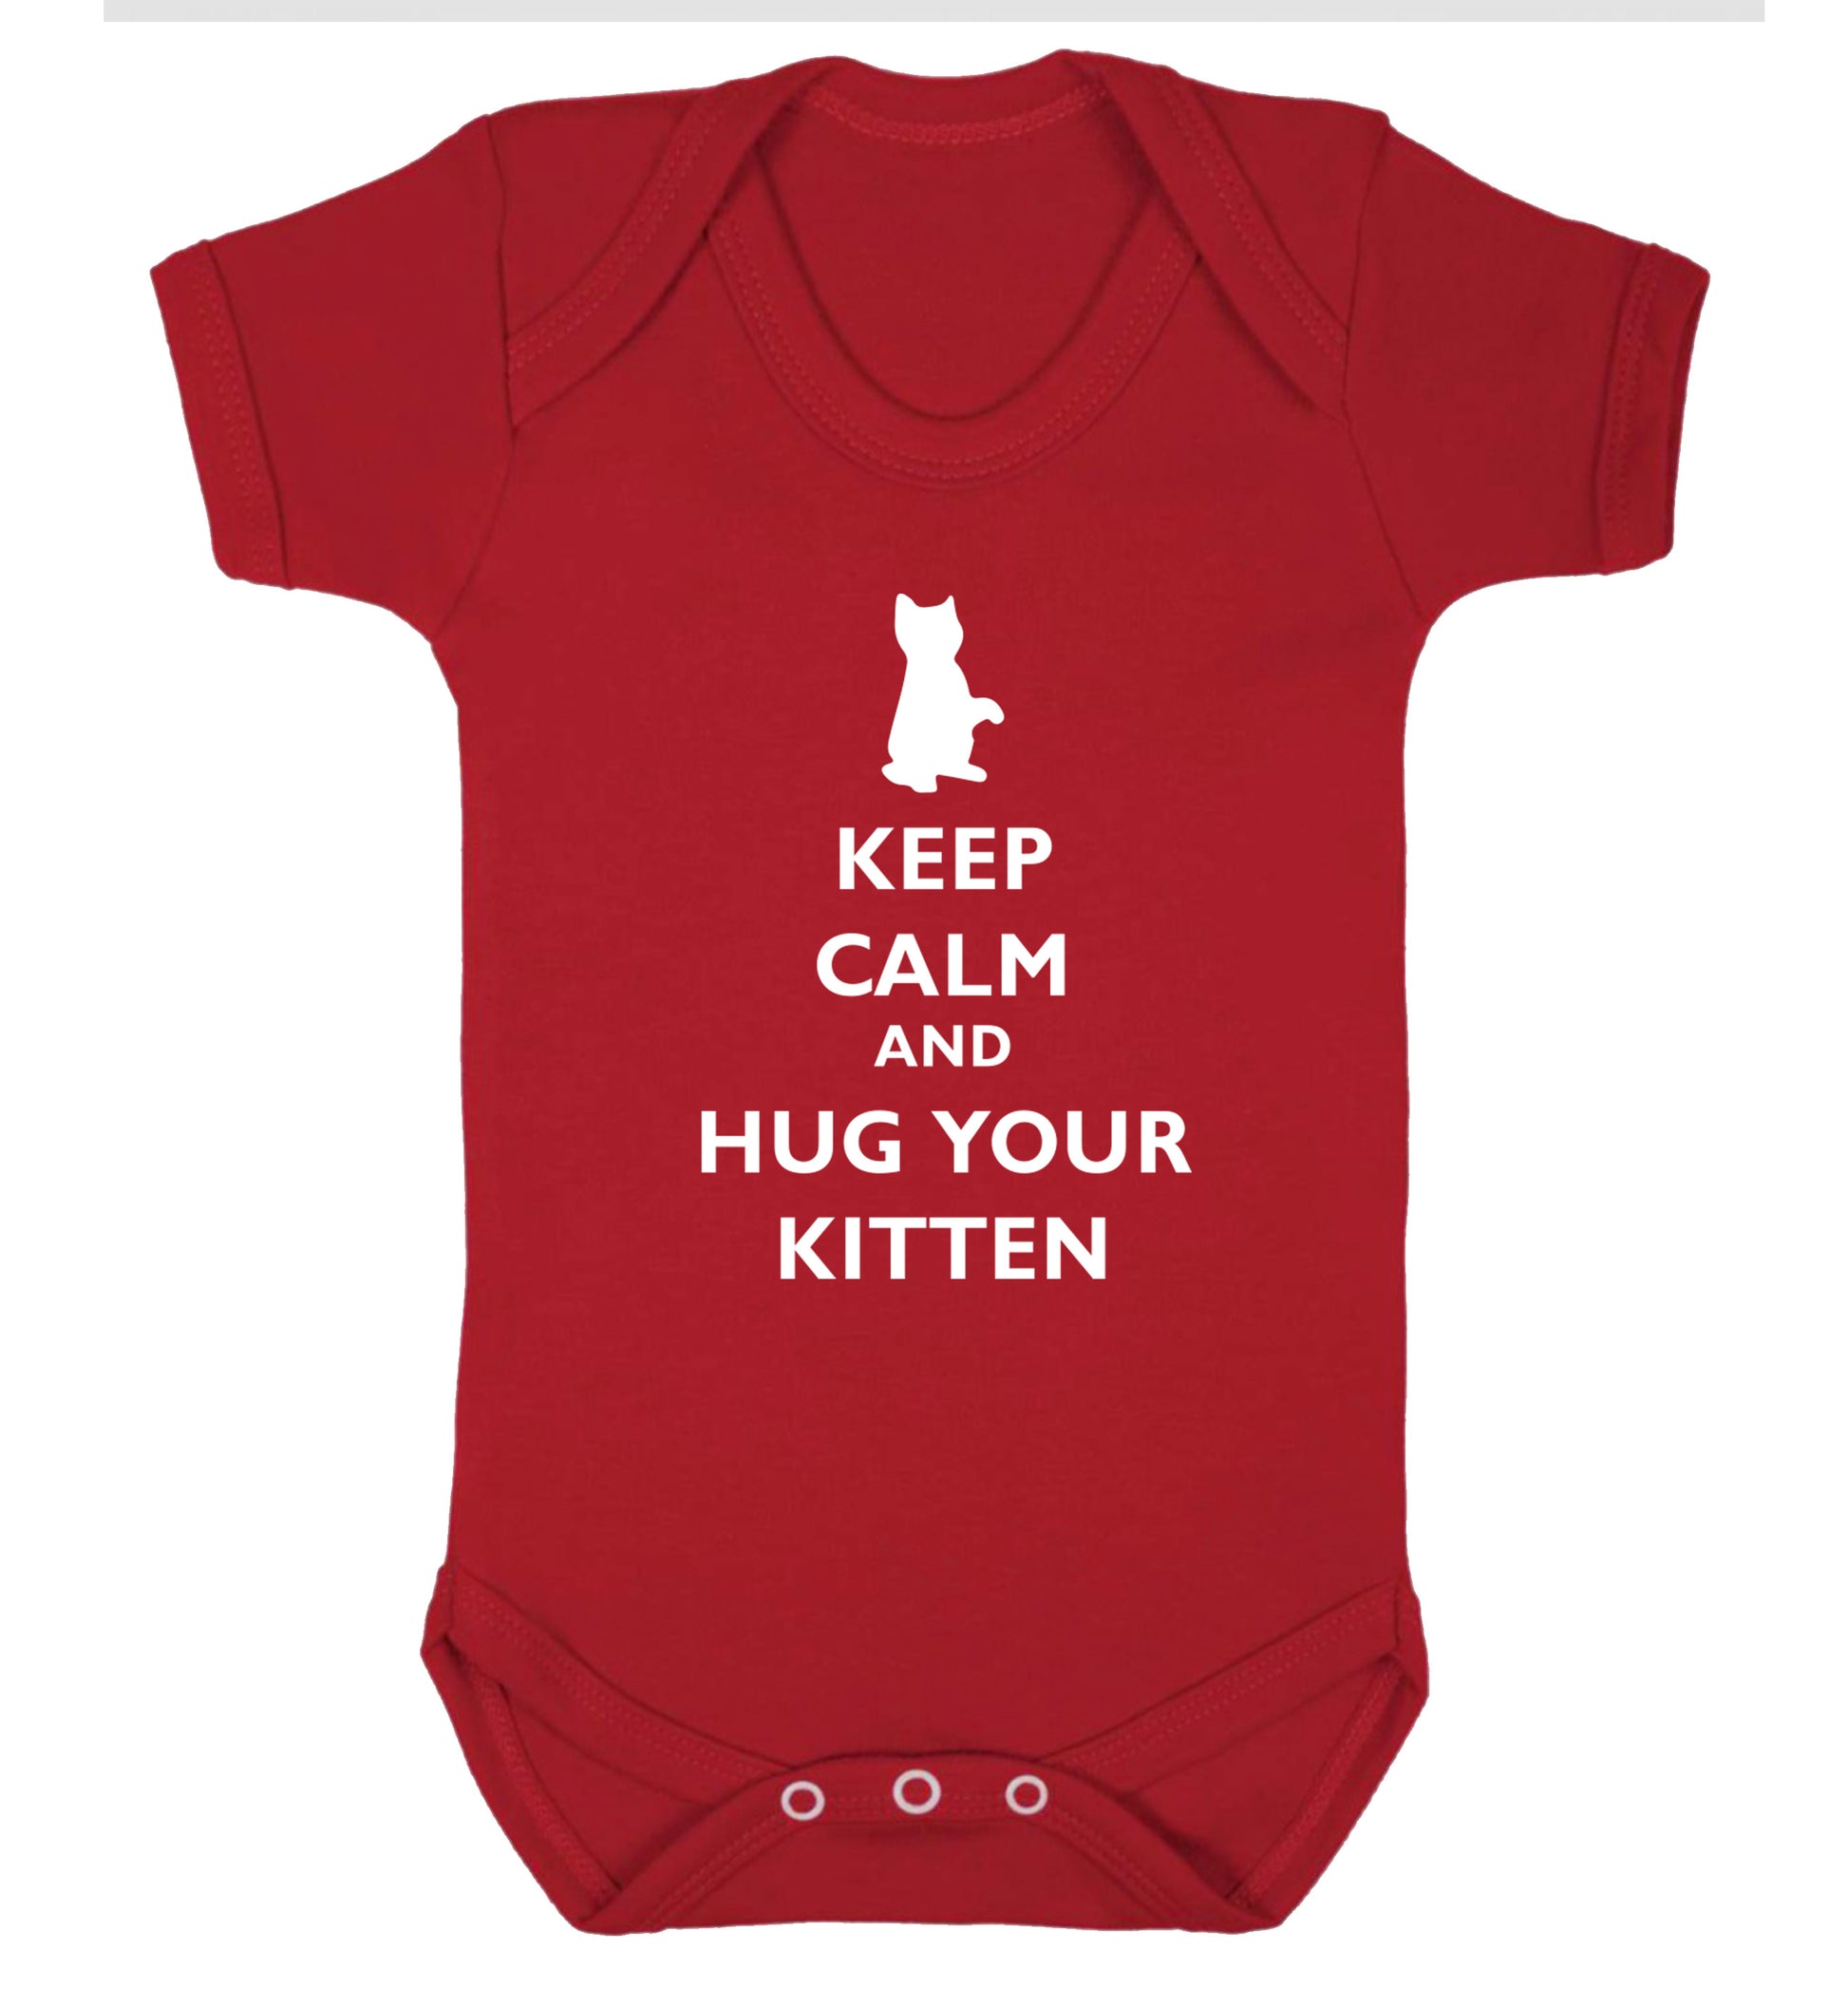 Keep calm and hug your kitten Baby Vest red 18-24 months